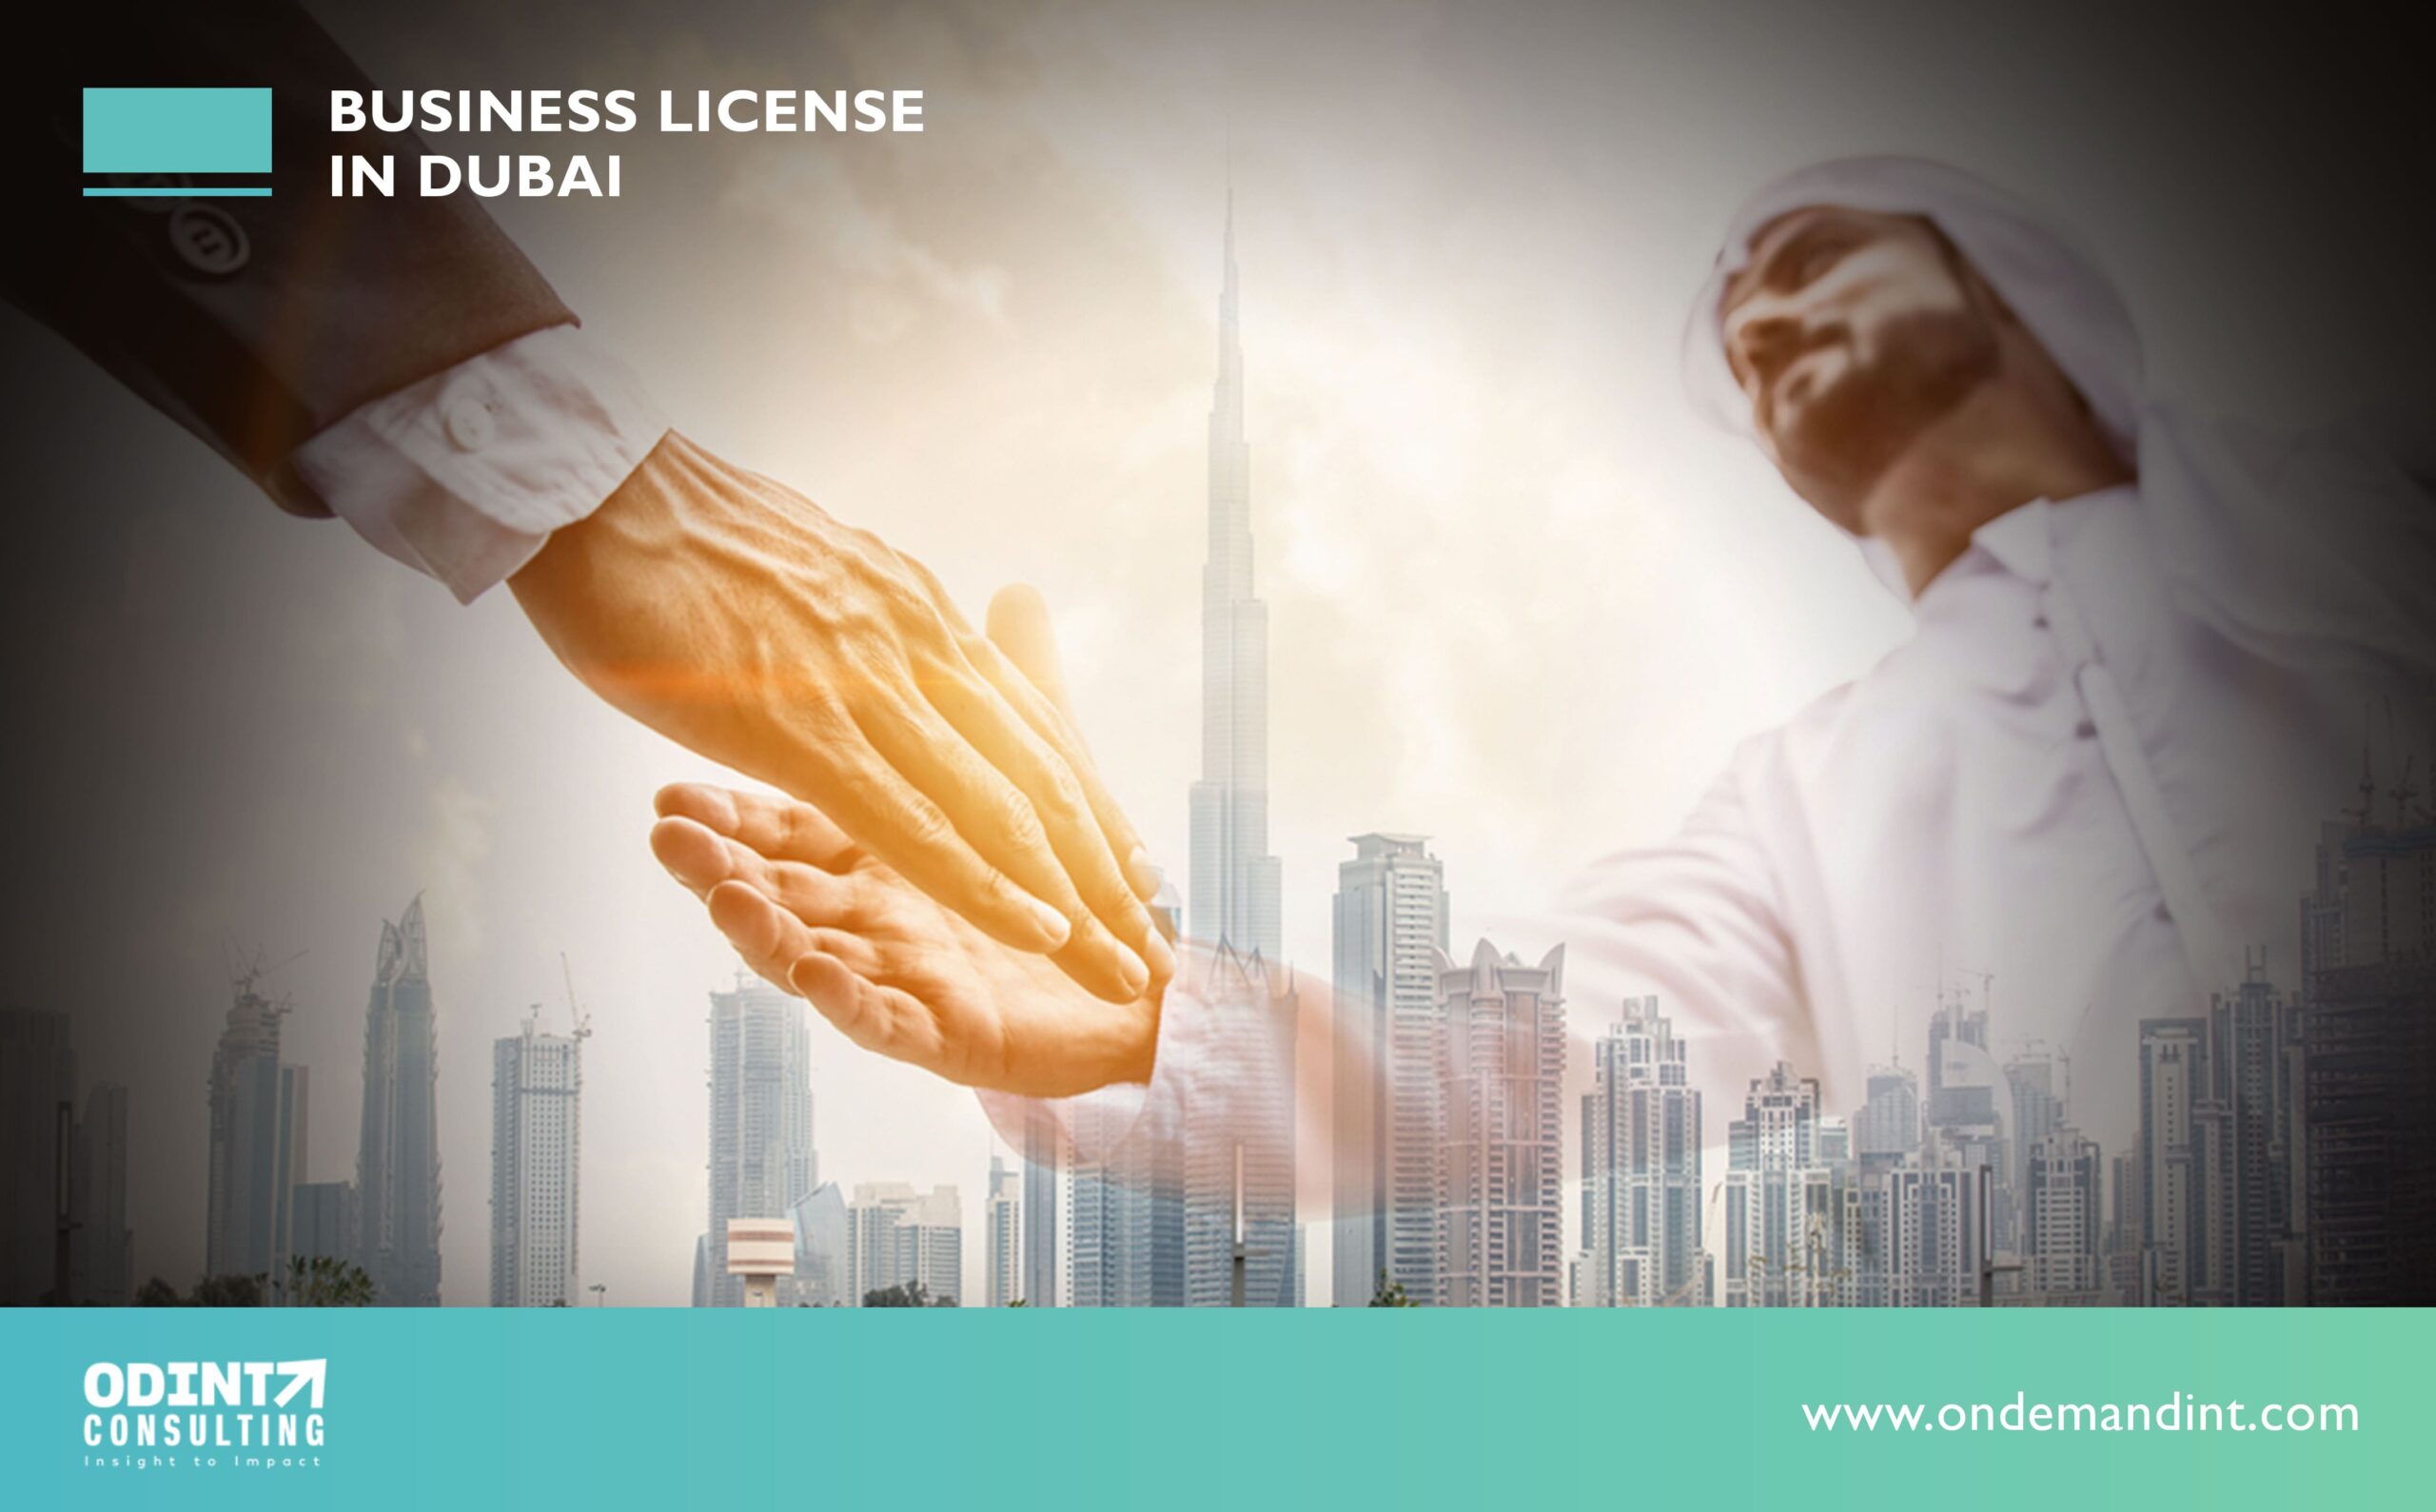 Business License in Dubai: Requirements, Kinds, Advantages & Factors to Consider